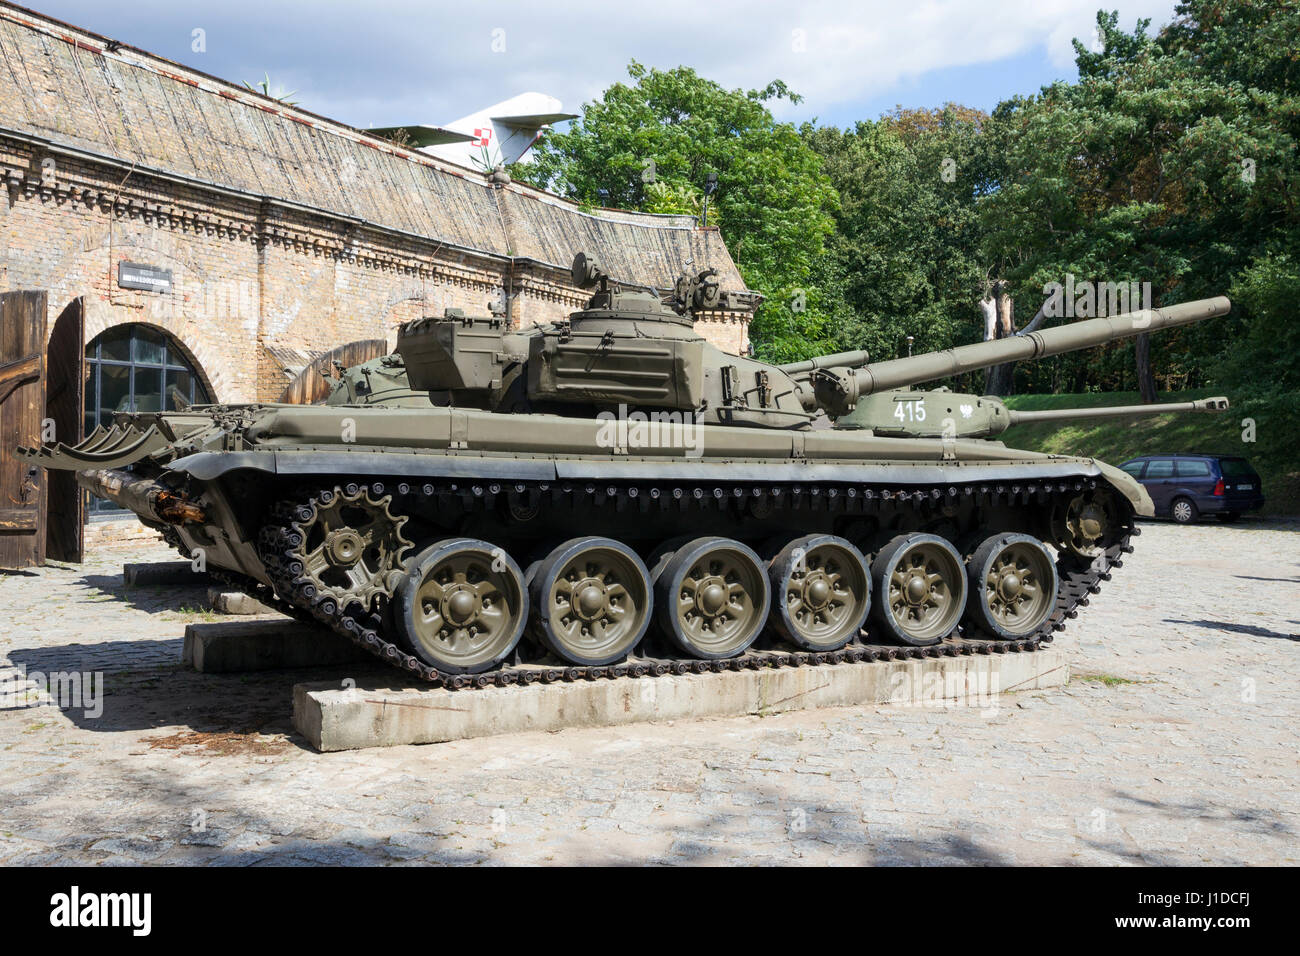 POZNAN, POLAND - AUG 20, 2014: Preserved T-72 tank on display in front of the Poznan Army Museum. Stock Photo